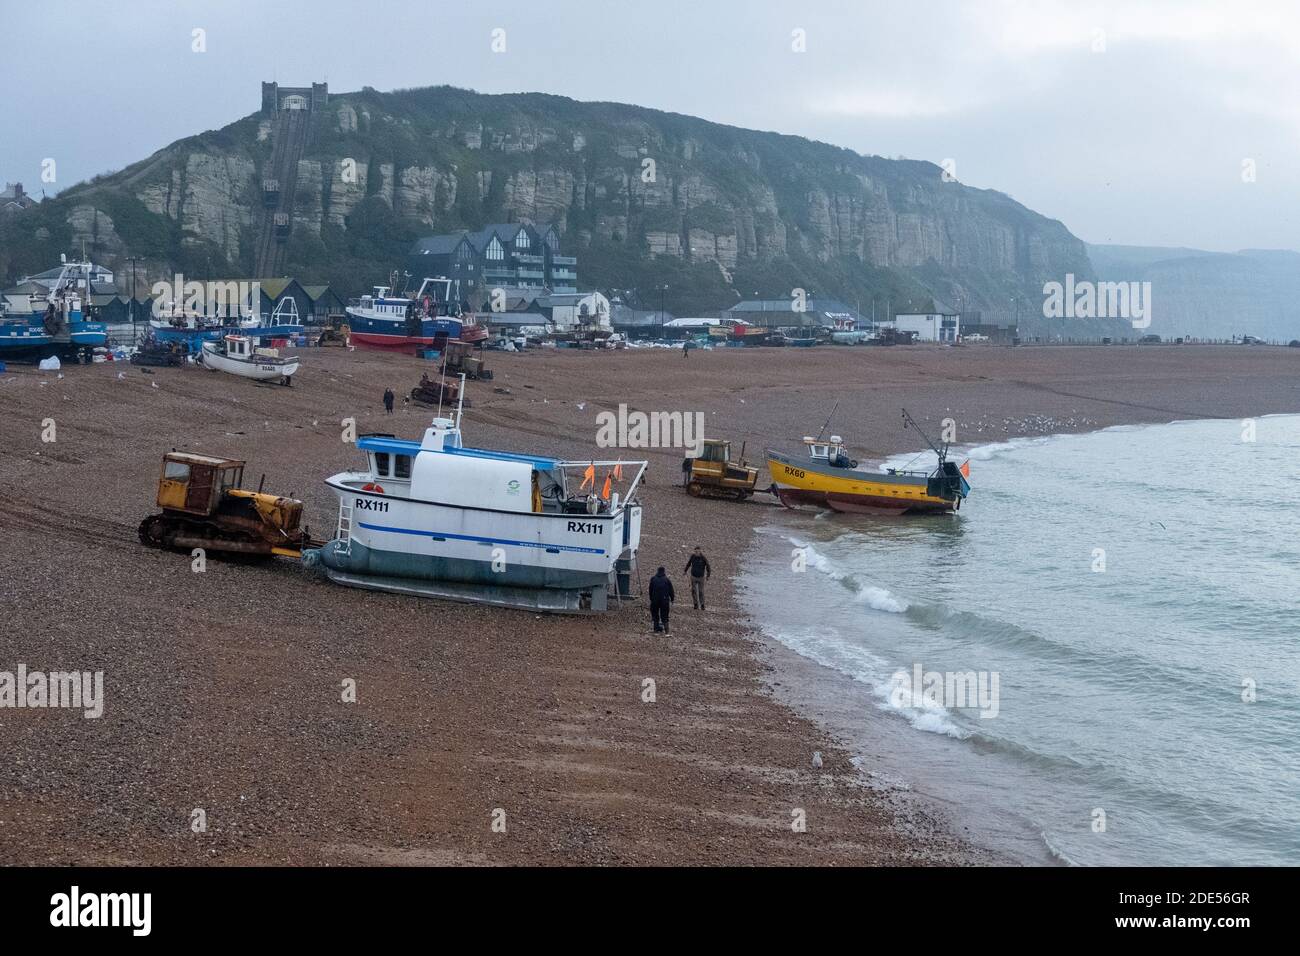 Hastings, East Sussex, UK. 29th November 2020. Hastings fishing boats put out to sea at dawn on a chilly grey Sunday morning. Stock Photo